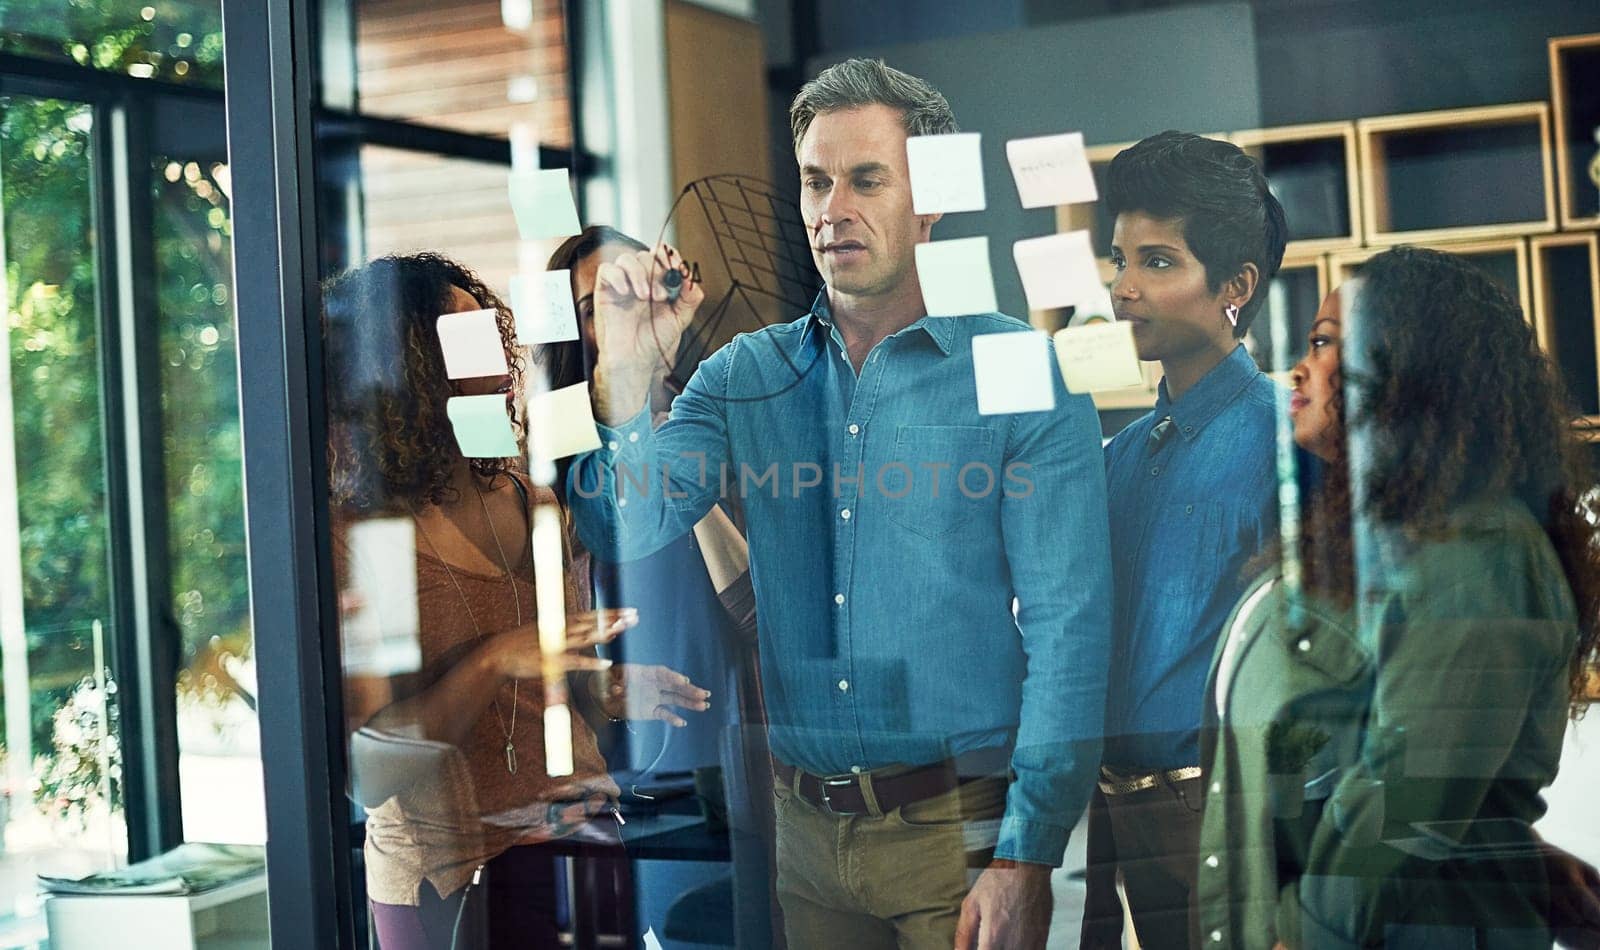 Mapping out an approach to reaching their goals. a group of businesspeople brainstorming with notes on a glass wall in an office